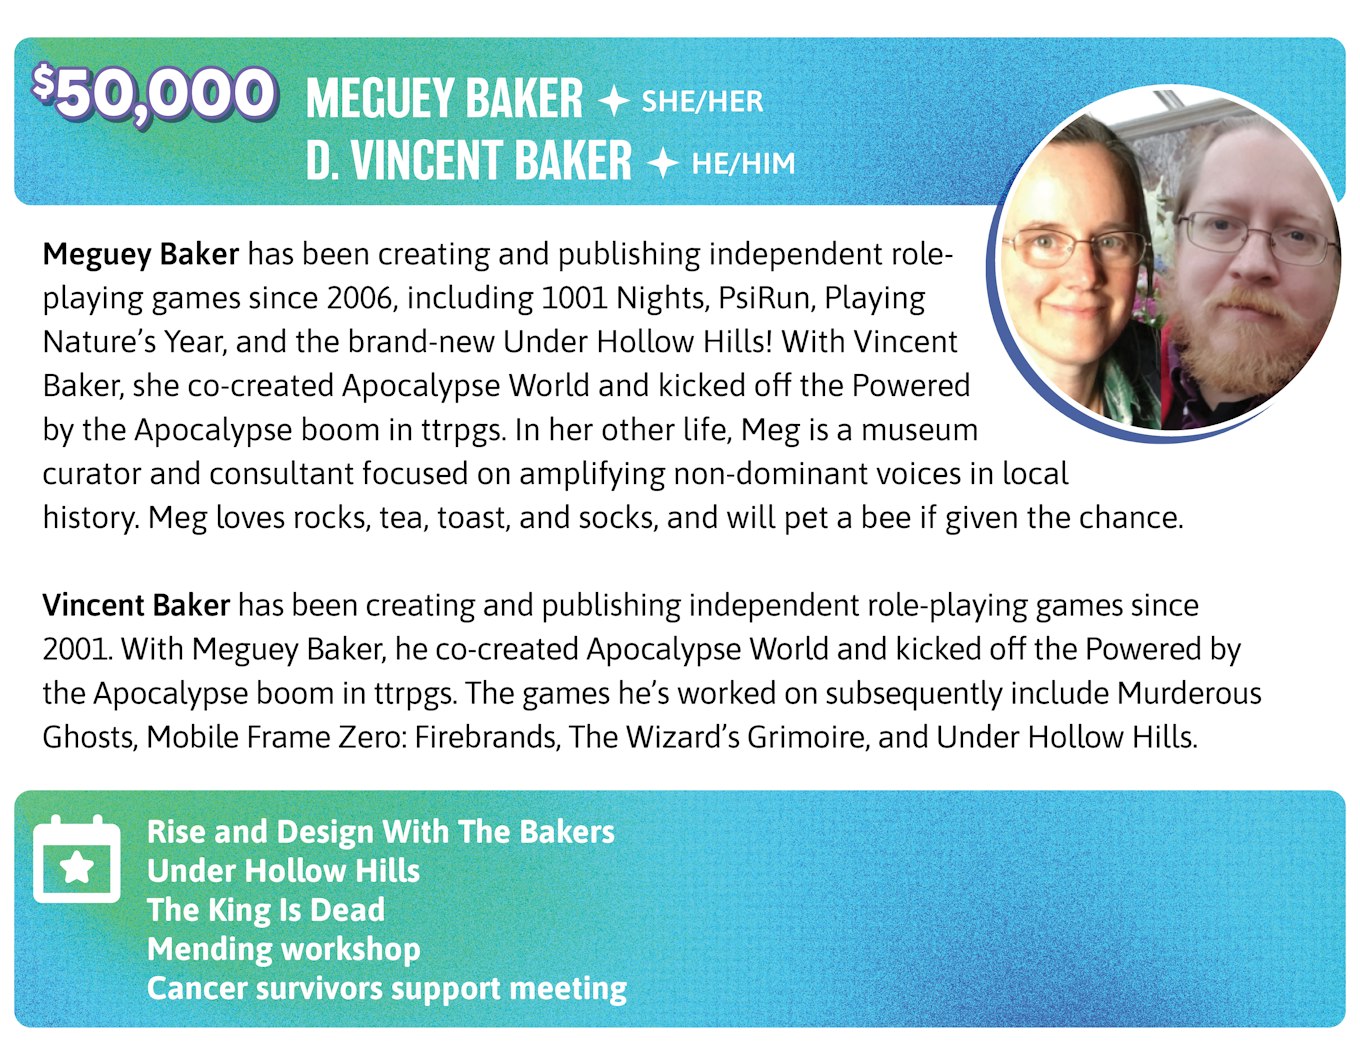 50,000. Meguey Baker has been creating and publishing independent role-playing games since 2006, including 1001 Nights, PsiRun, Playing Nature's Year, and the brand-new Under Hollow Hills! With Vincent Baker, she co-created Apocalypse World and kicked off the Powered by the Apocalypse boom in ttrpgs. In her other life, Meg is a museum curator and consultant focused on amplifying non-dominant voices in local history. Meg loves rocks, tea, toast, and socks, and will pet a bee if given the chance.  Vincent Baker has been creating and publishing independent role-playing games since 2001. With Meguey Baker, he co-created Apocalypse World and kicked off the Powered by the Apocalypse boom in ttrpgs. The games he's worked on subsequently include Murderous Ghosts, Mobile Frame Zero: Firebrands, The Wizard's Grimoire, and Under Hollow Hills." Meguey and Vincent Baker will host the following events: Morning Conversation With The Bakers, Under Hollow Hills, The King Is Dead, Mending workshop, and a cancer survivors support meeting